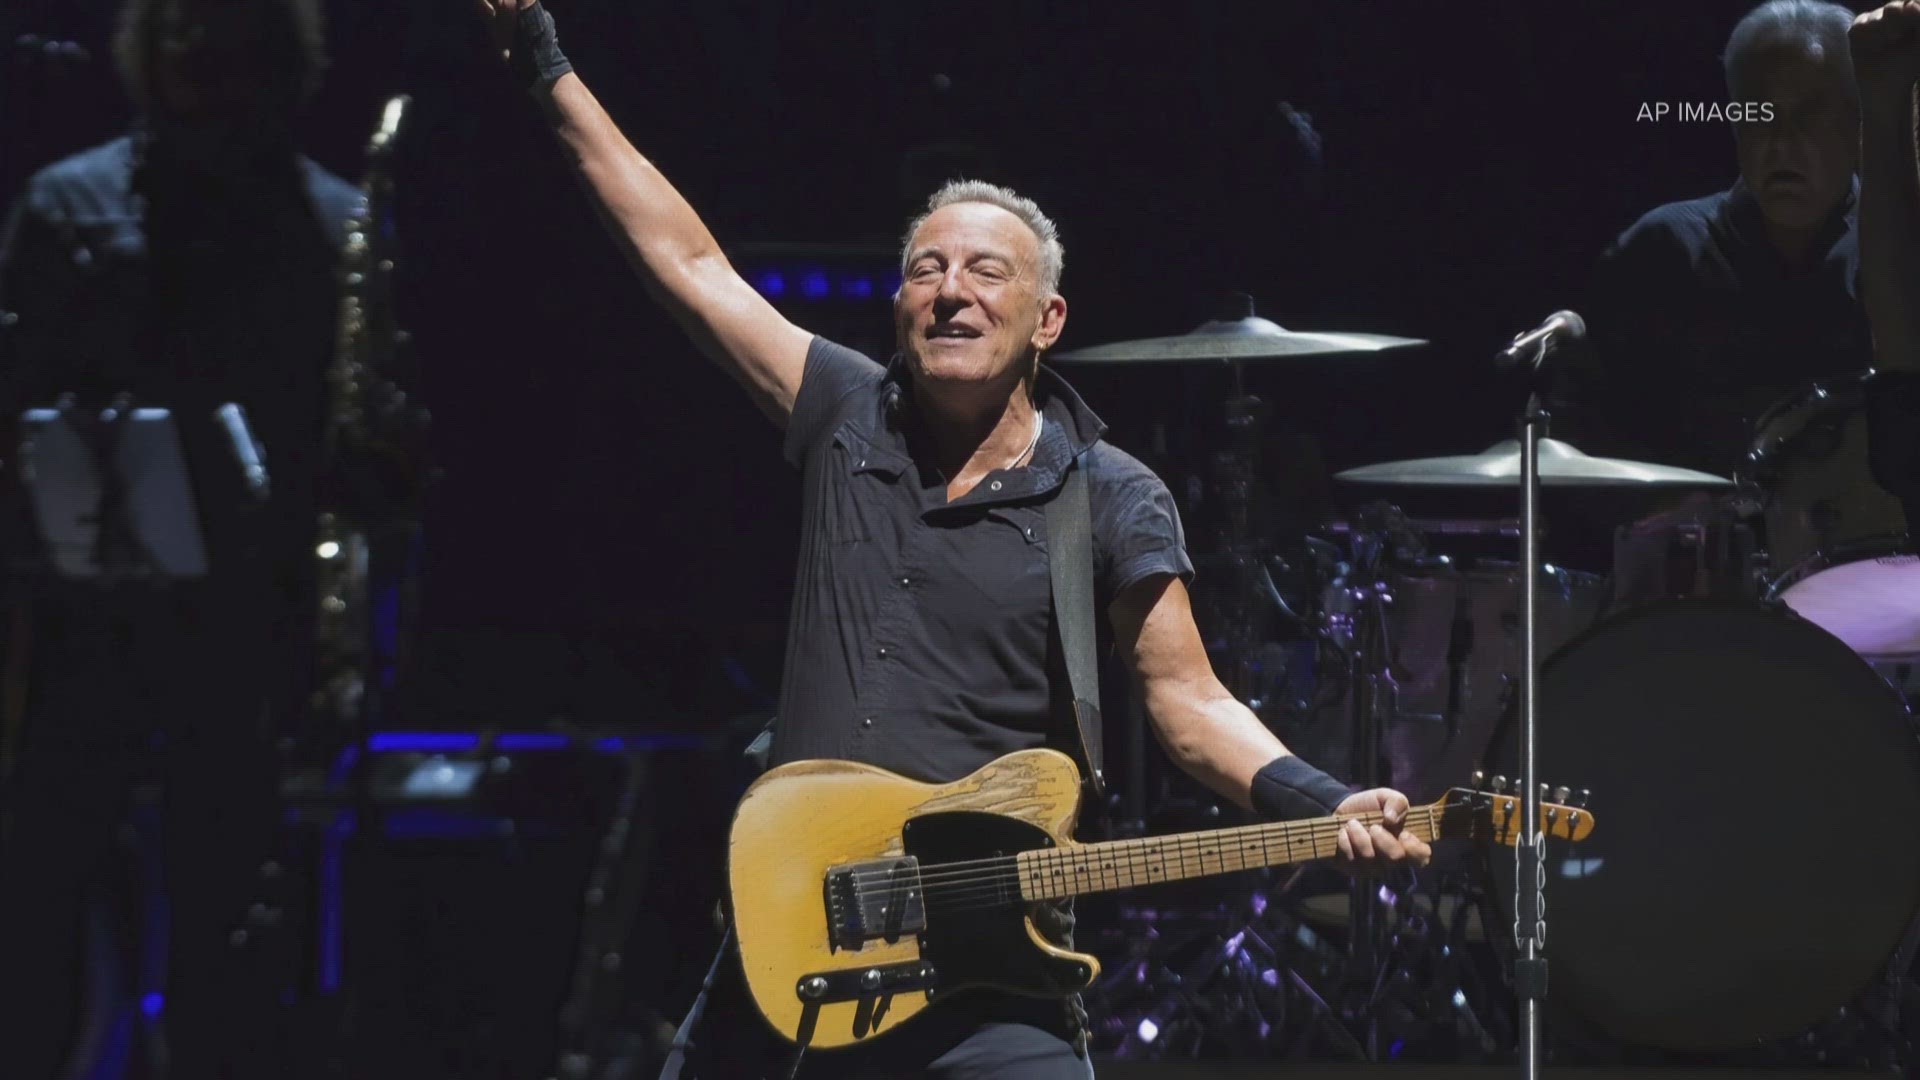 Bruce Springsteen and the E Street Band postponed eight shows after Springsteen was diagnosed with peptic ulcer disease— Dr. Payal Kohli explains what this is.